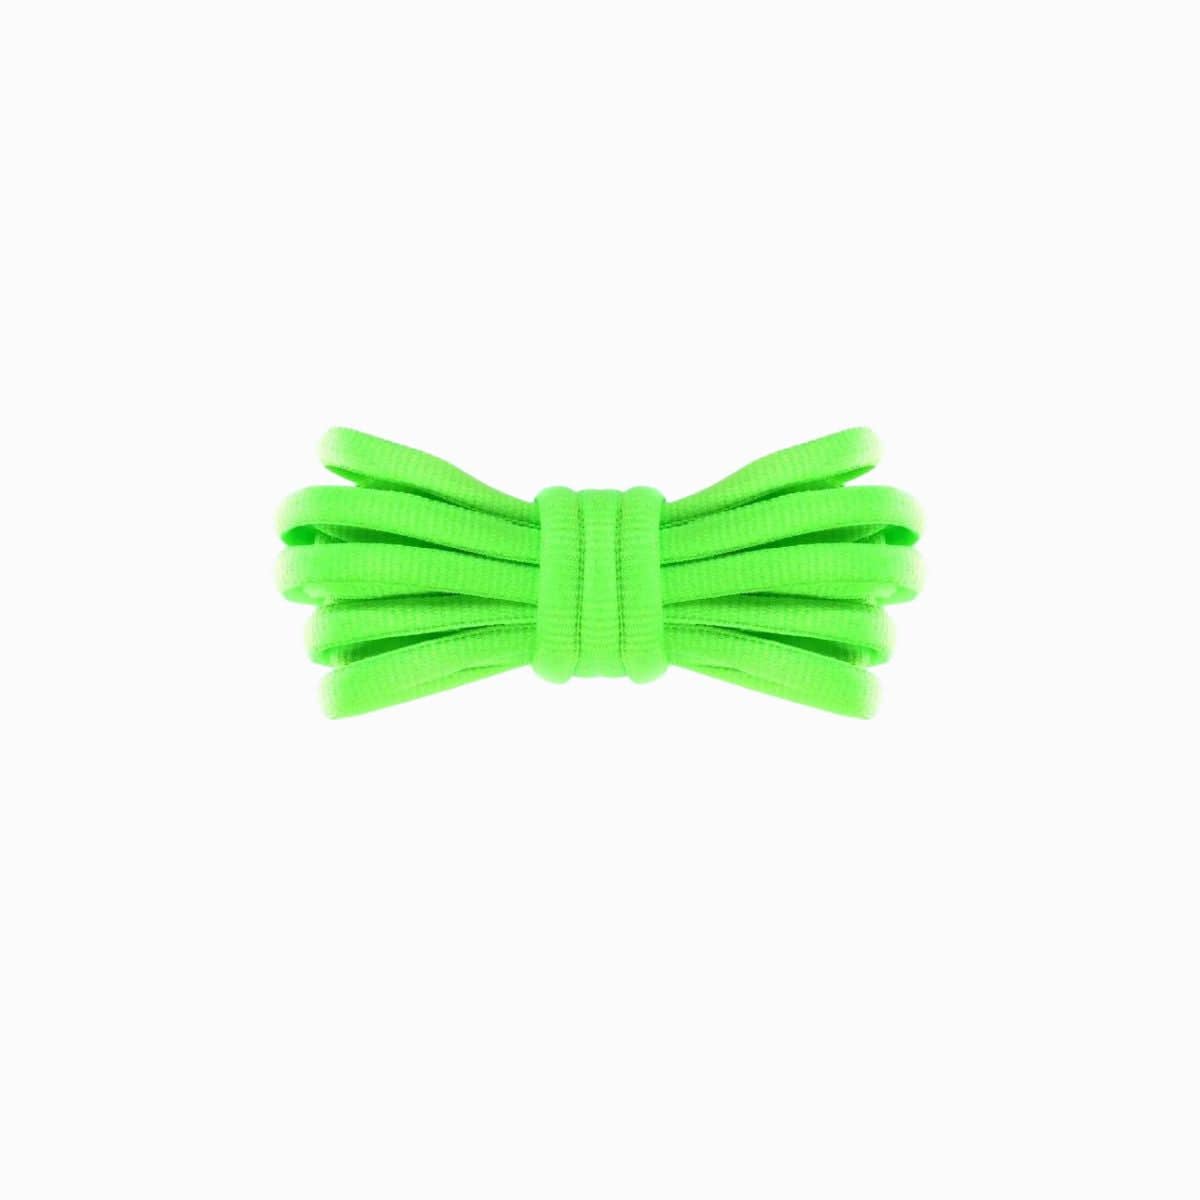 Nike_TN_Replacement_Shoelaces_Fluorescent_Green